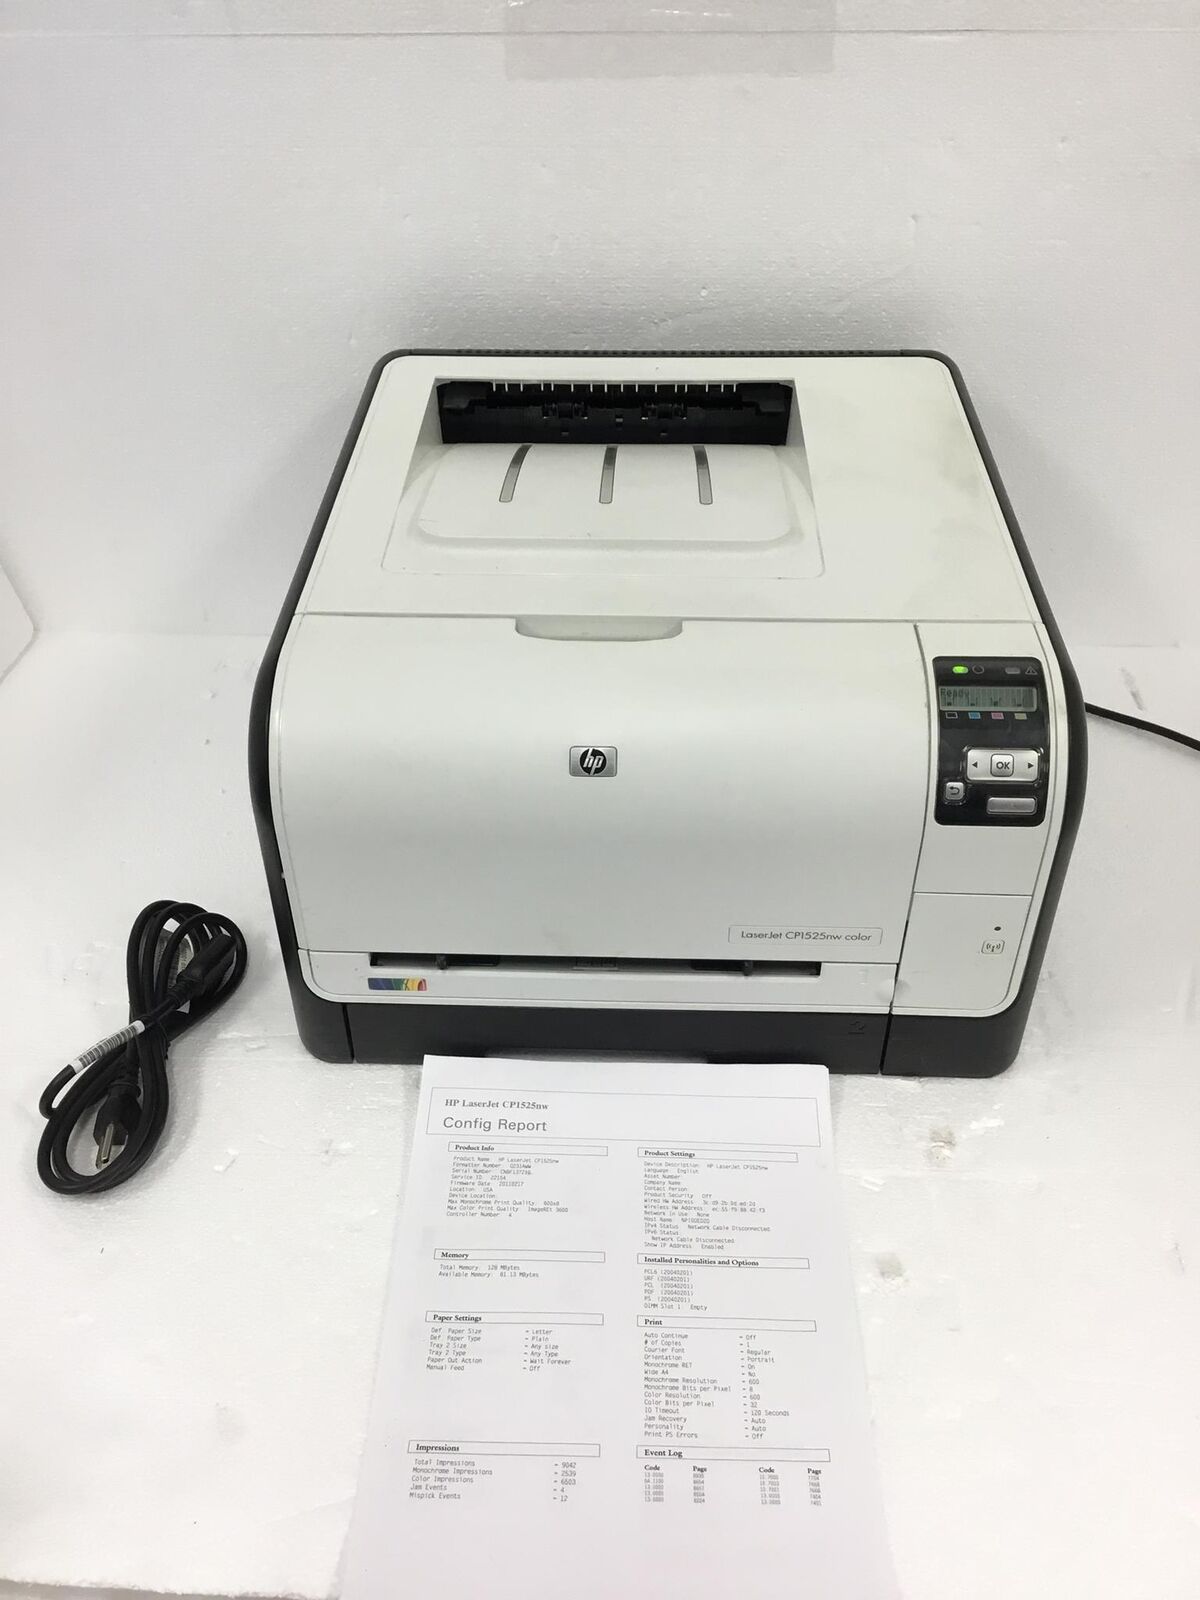 Hp Laserjet CP1525NW Color Printer 128Mb Page Count 9044 Usb Network Wireless